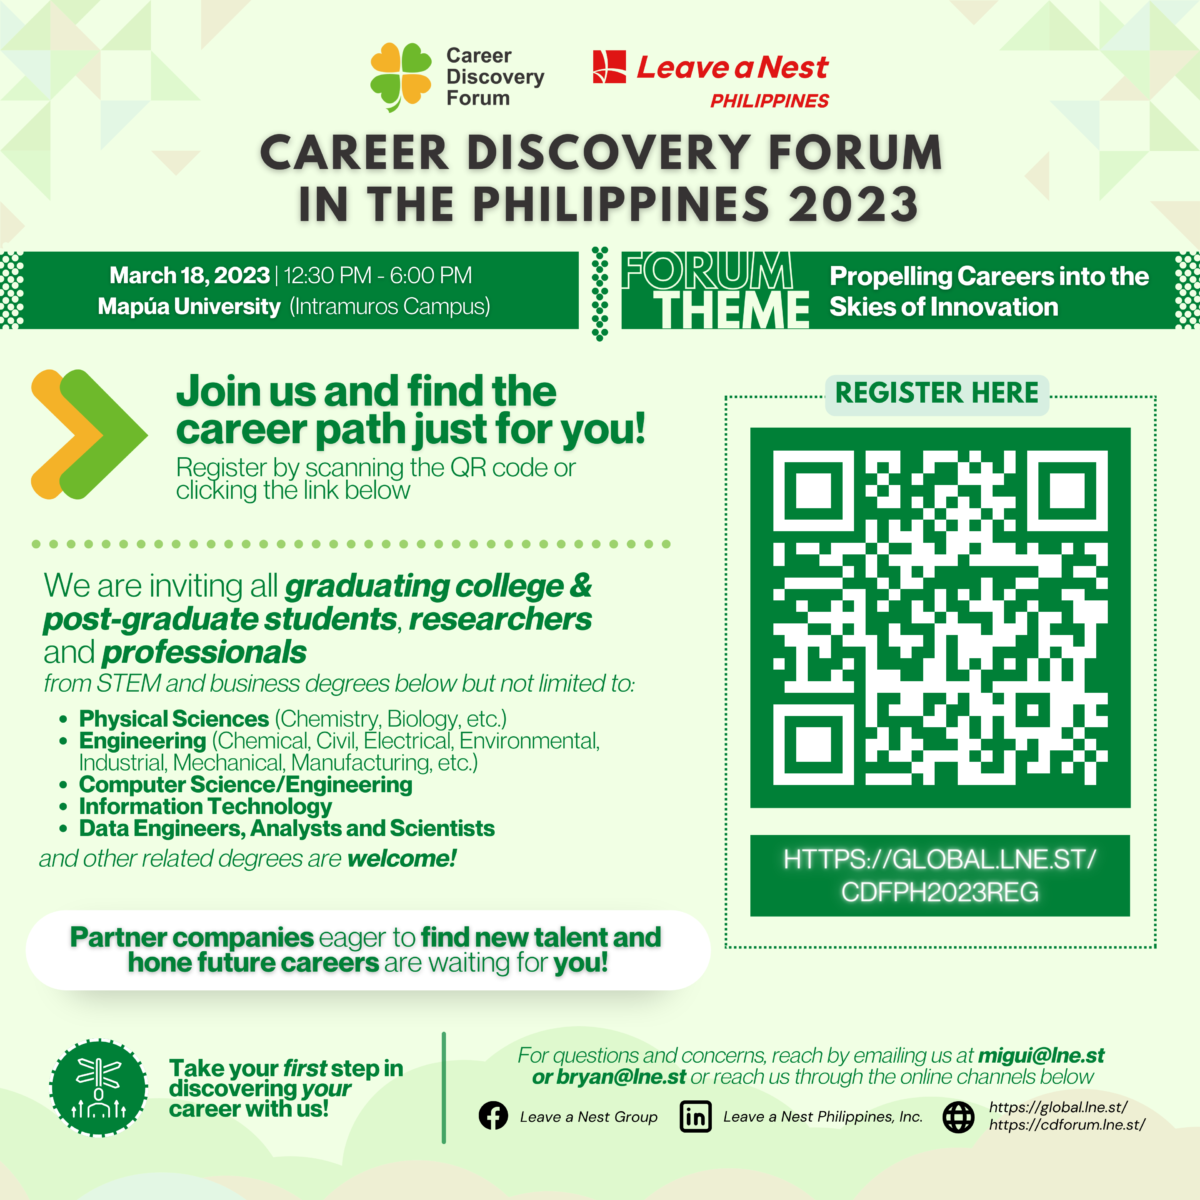 Meet our Speakers for the Career Discovery Forum in the Philippines 2023